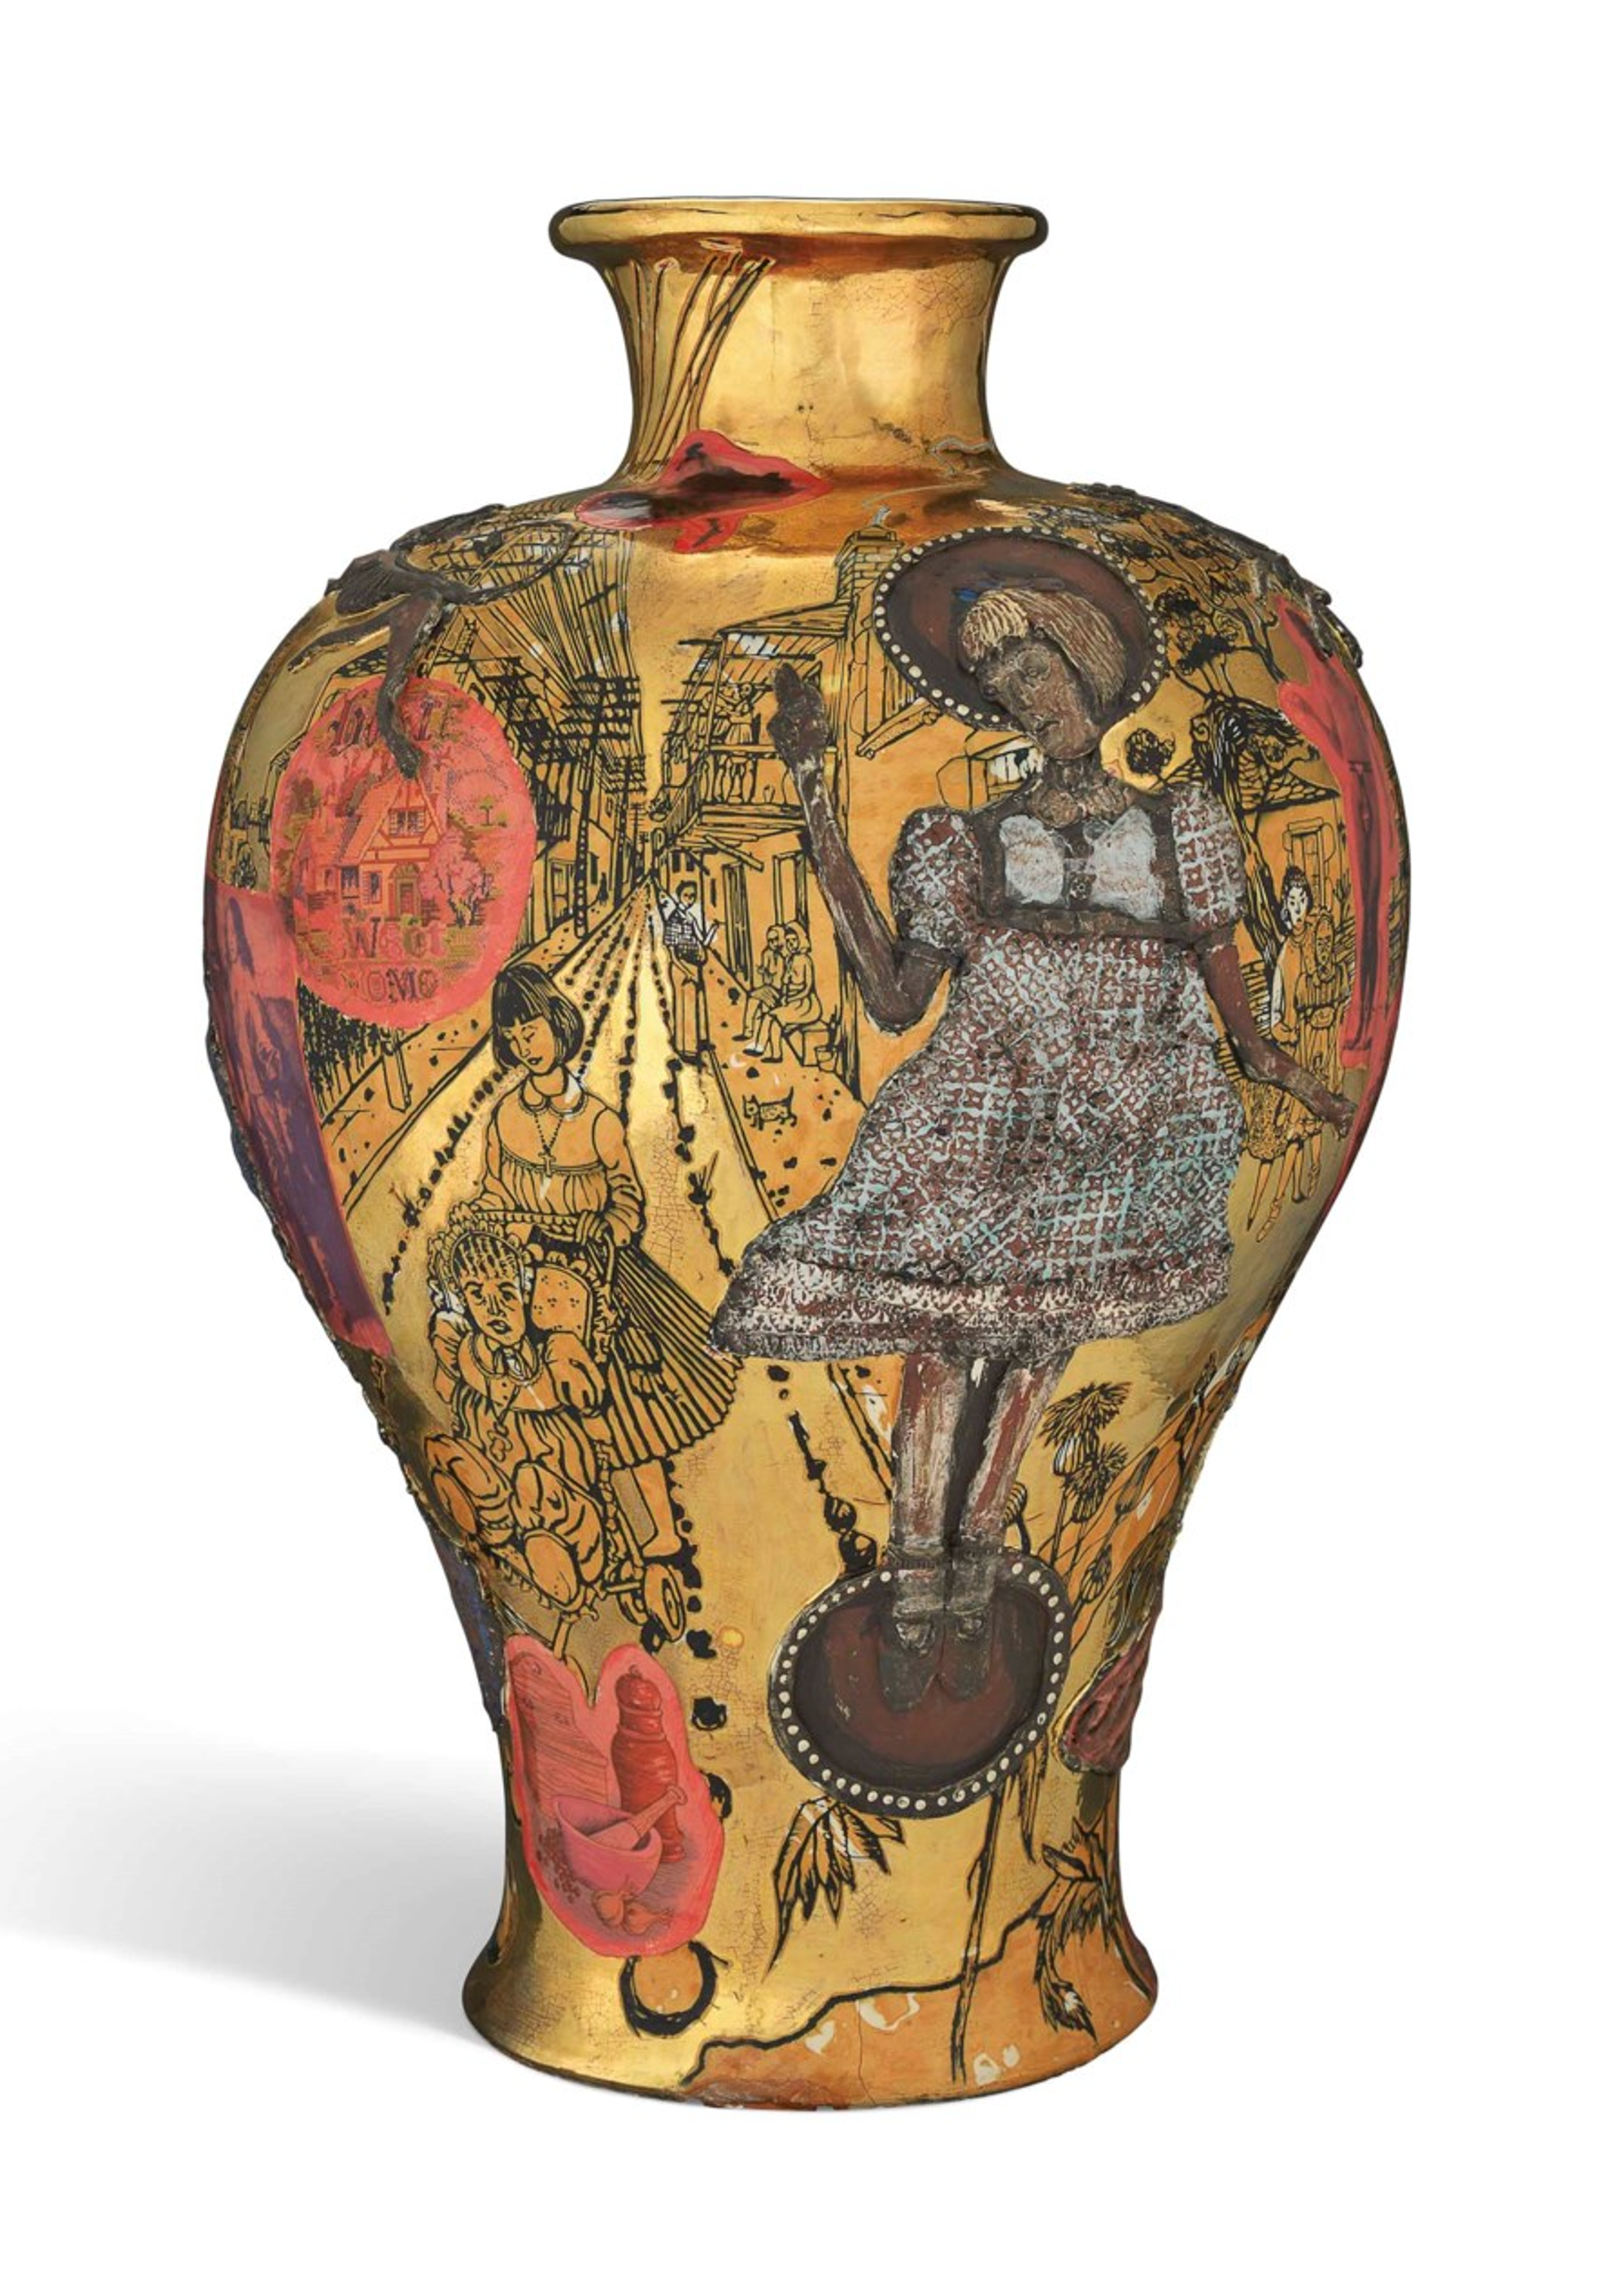 Glazed earthenware by Grayson Perry featuring a depiction of Claire against a backdrop of Northern Spain.